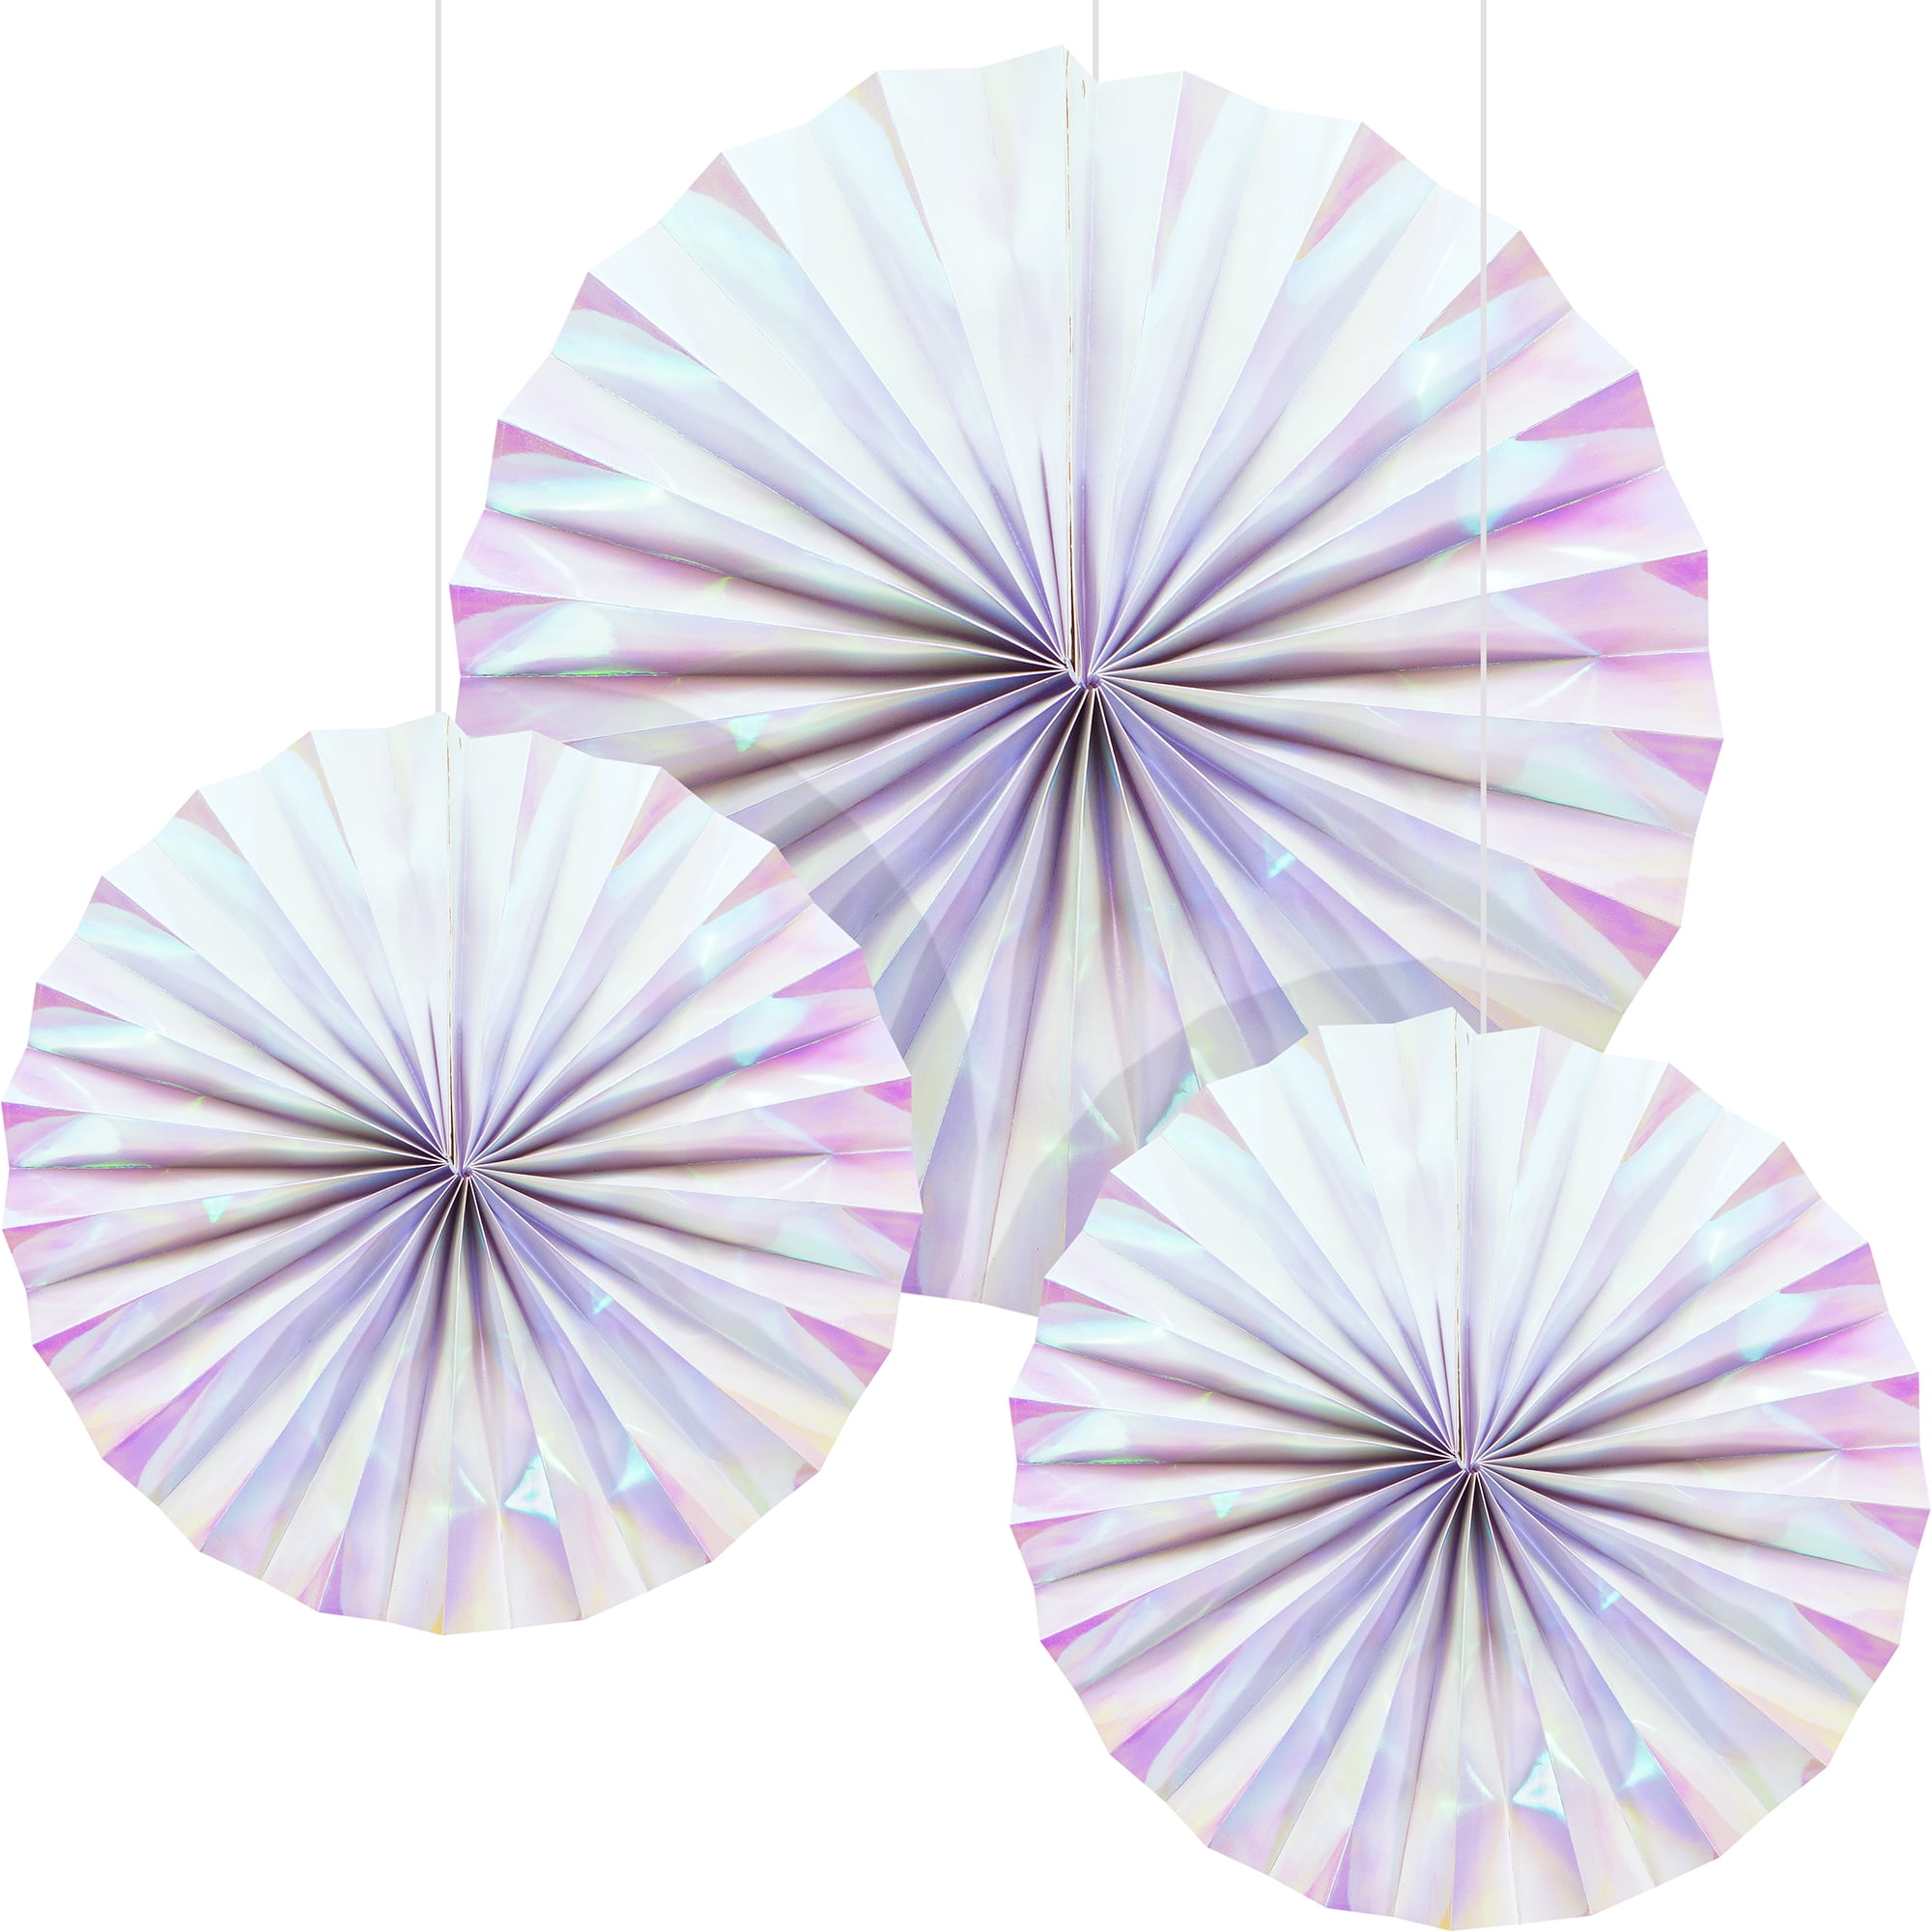 Iridescent-Holographic Christmas-Tree Star Party-Decorations Garland - 52  Ft Winter New Year Supplies Hanging Paper Streamers Banner,Birthday Wedding